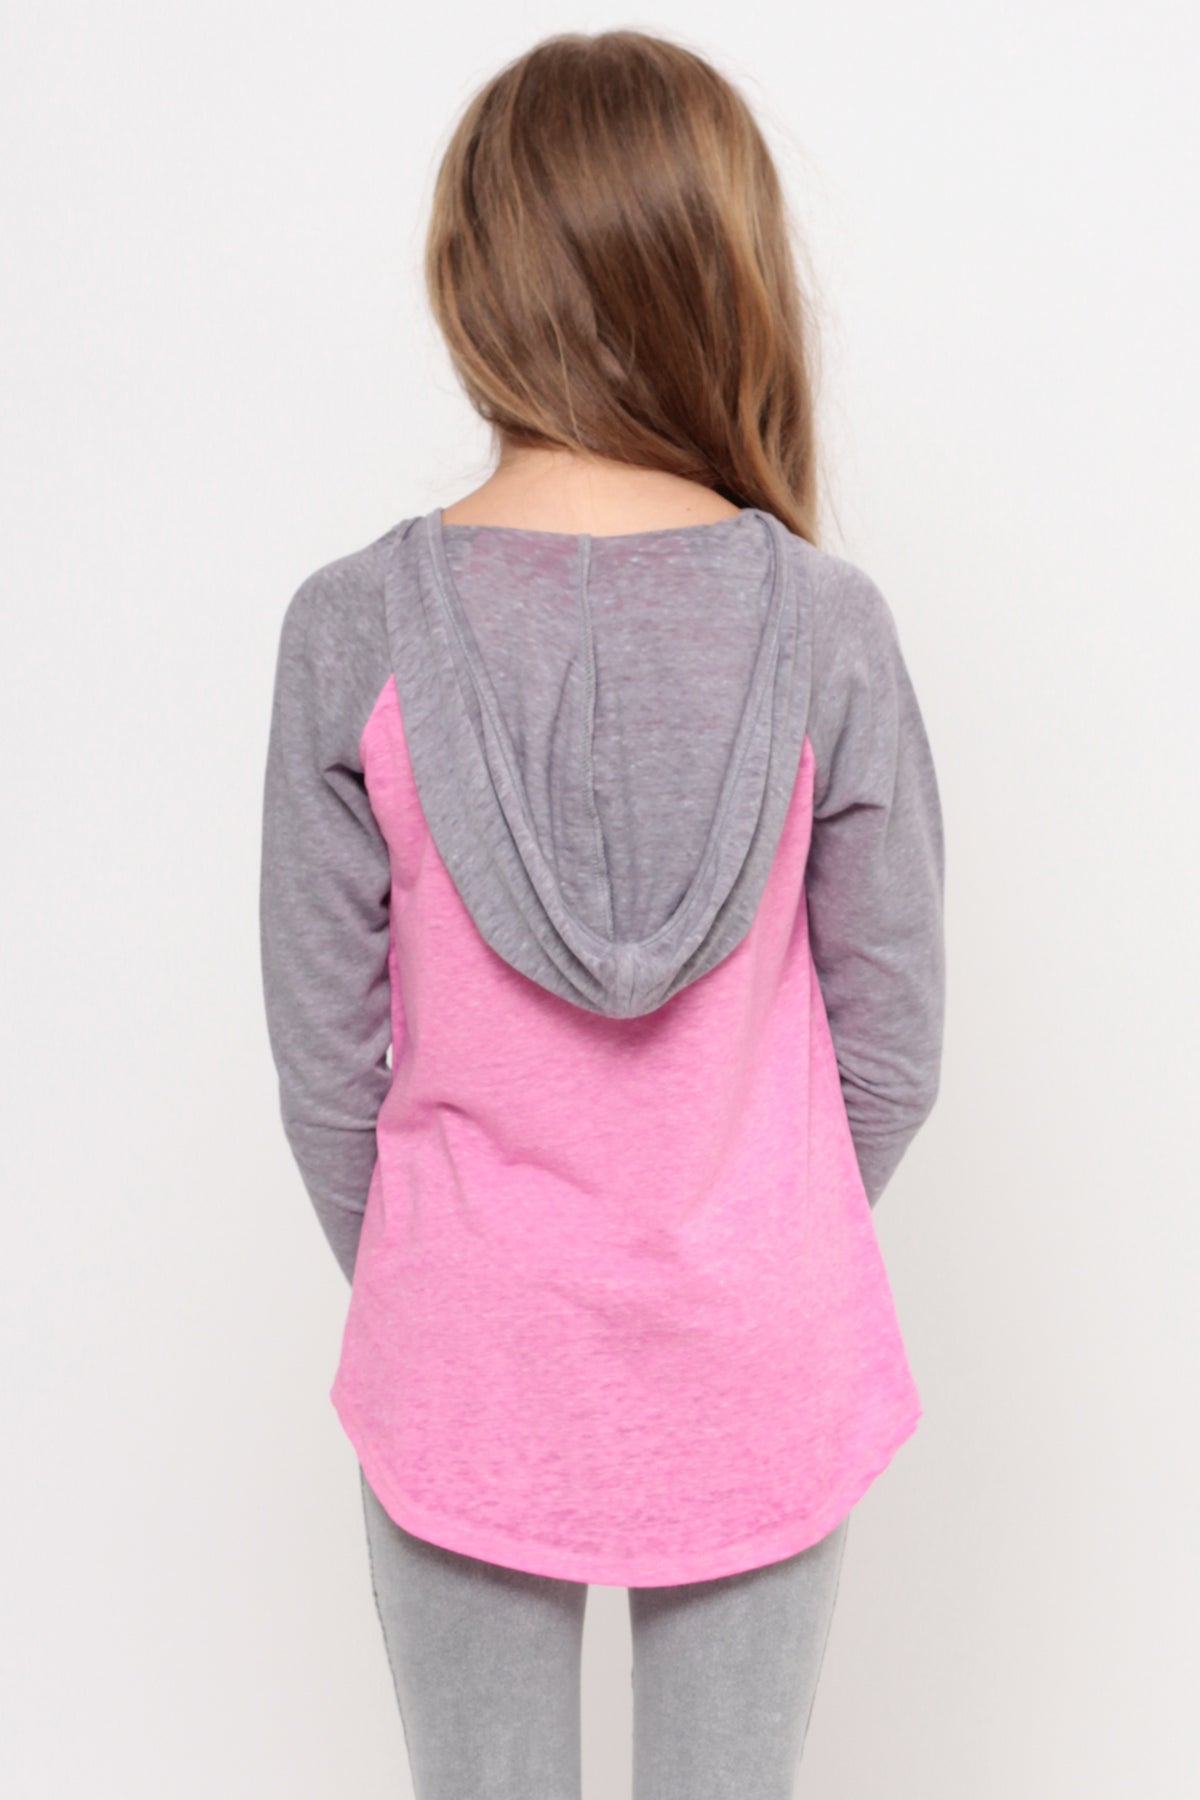 If I Was You | Hooded Baseball Top - Pink